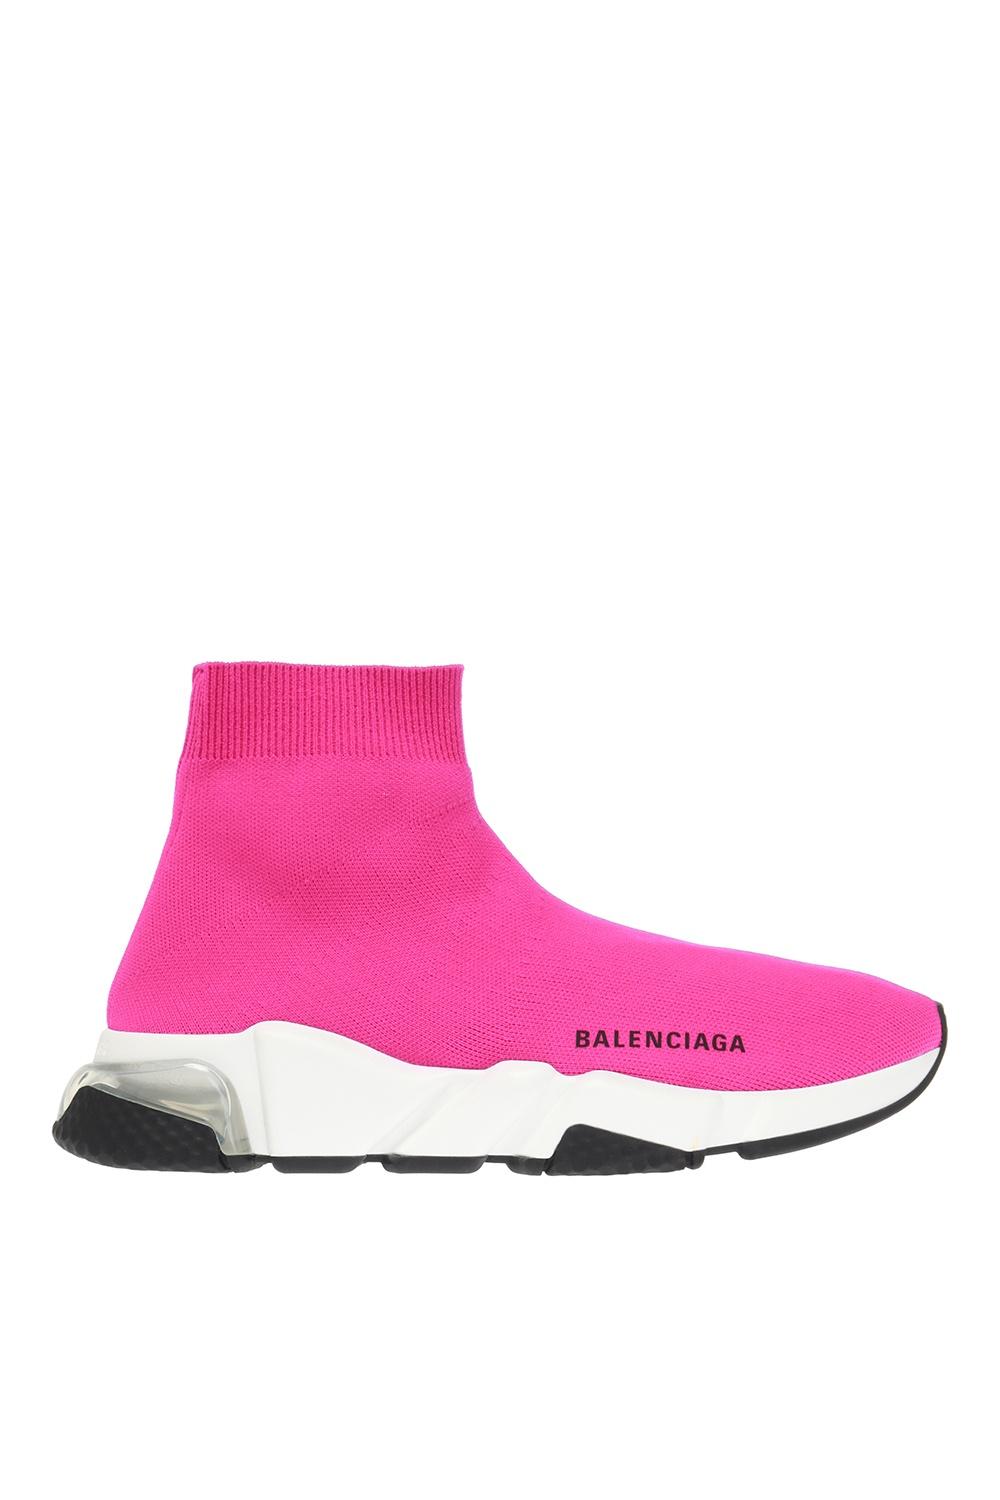 Overlevelse løg romantisk Balenciaga Women's Speed Knitted High-top Trainers in Pink | Lyst